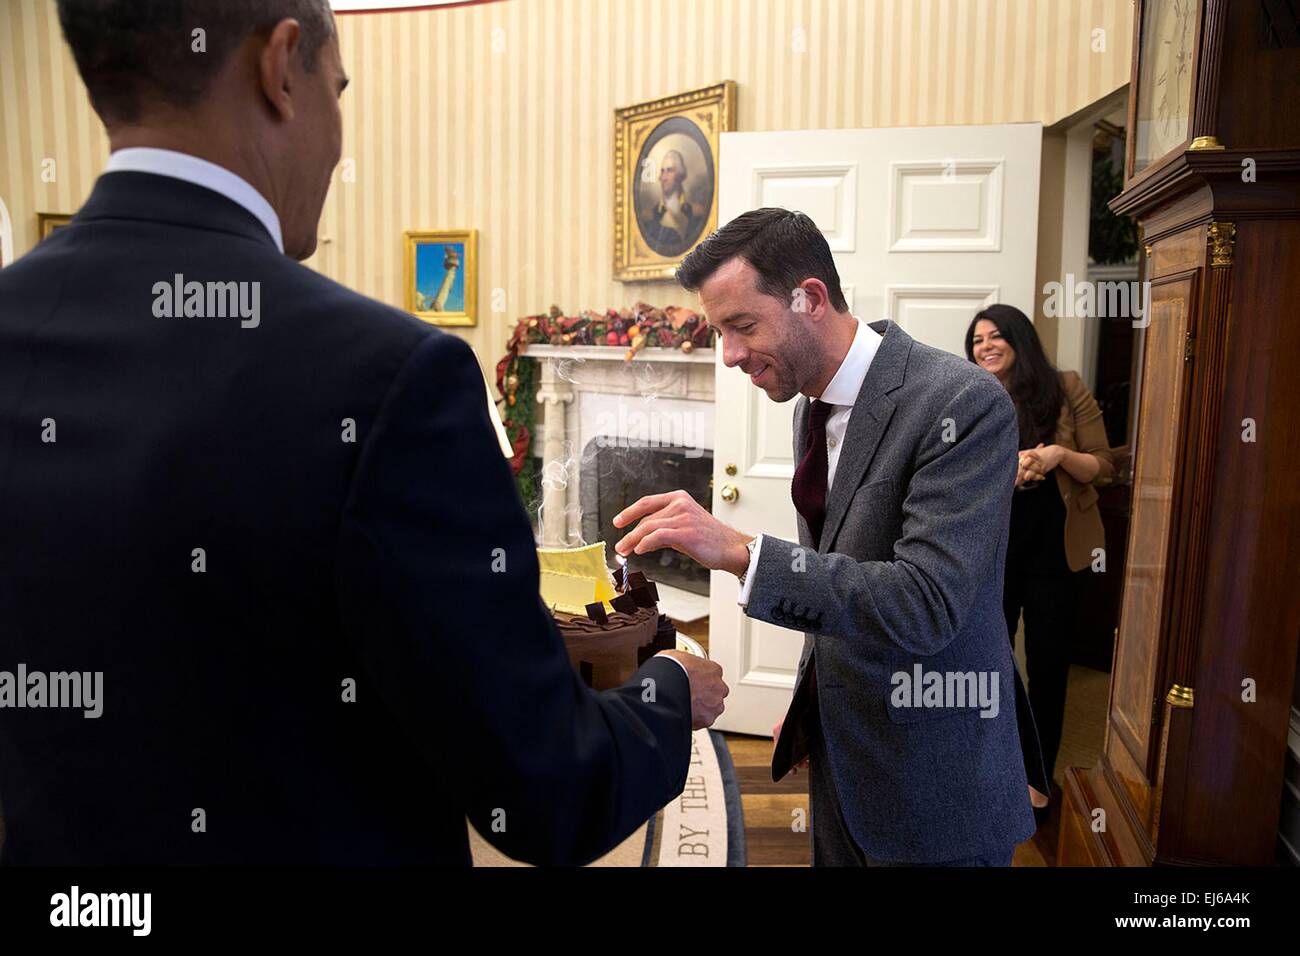 US President Barack Obama presents a birthday cake to Brian Mosteller, Director of Oval Office Operations, in the Oval Office of the White House December 5, 2014 in Washington, DC. Stock Photo